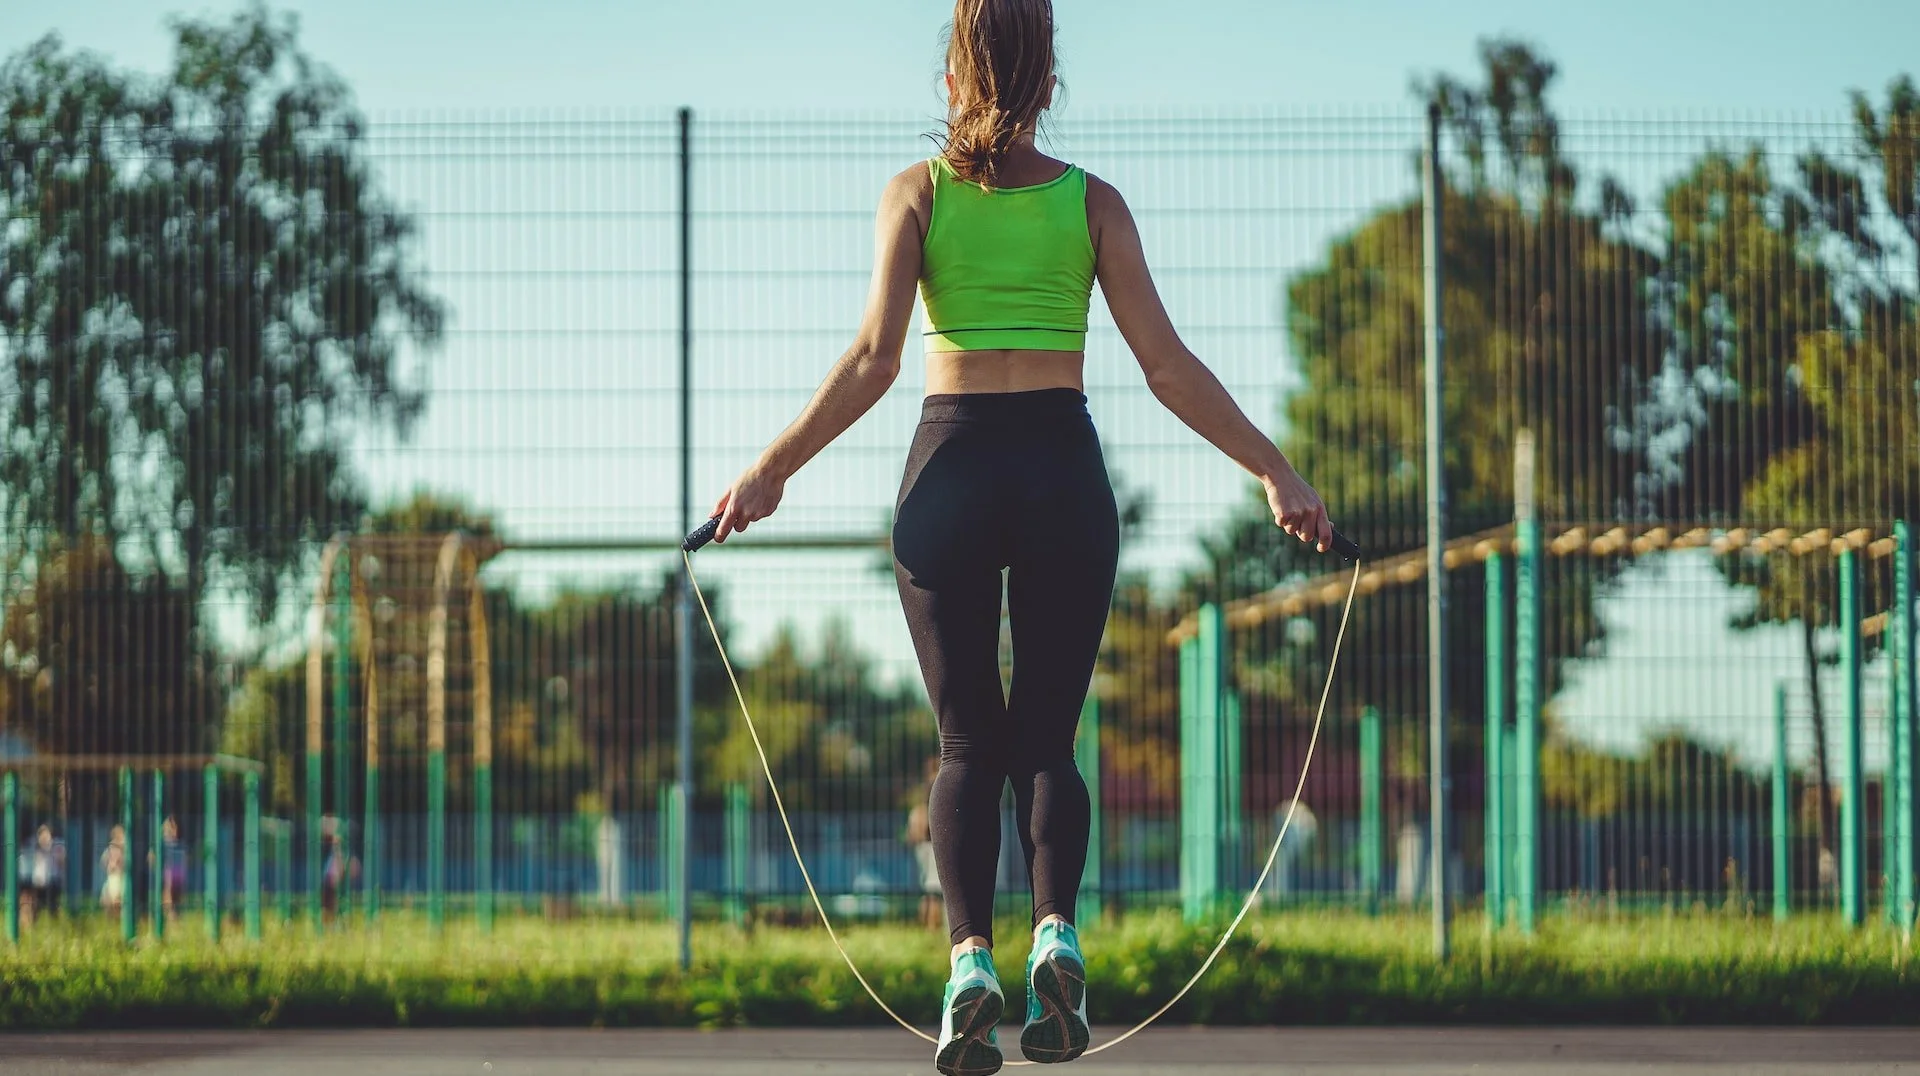 Jump Rope Workouts for Every Skill Level - Girls Soccer Network